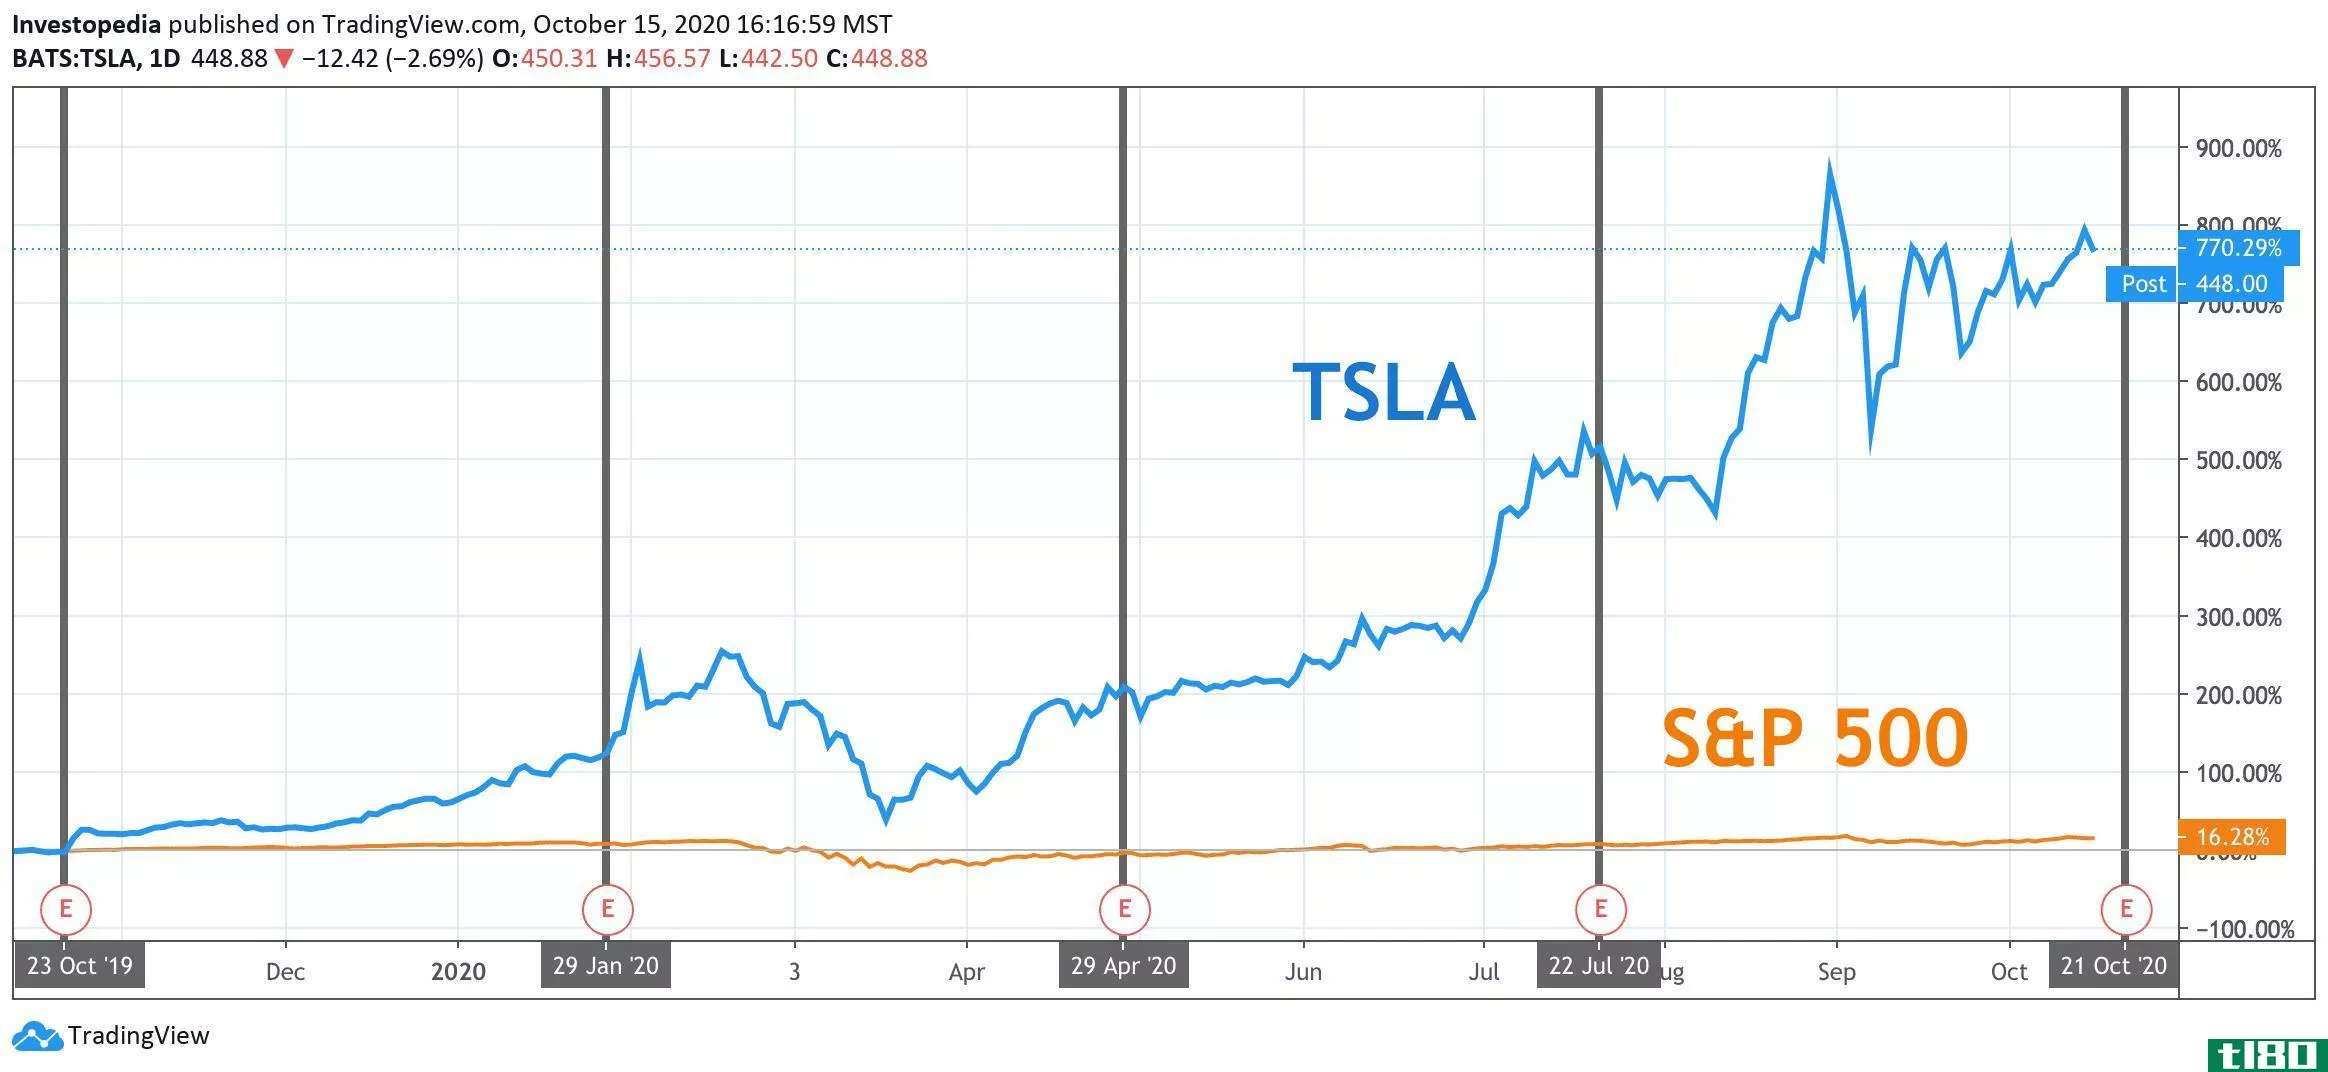 One Year Total Return for S&P 500 and Tesla